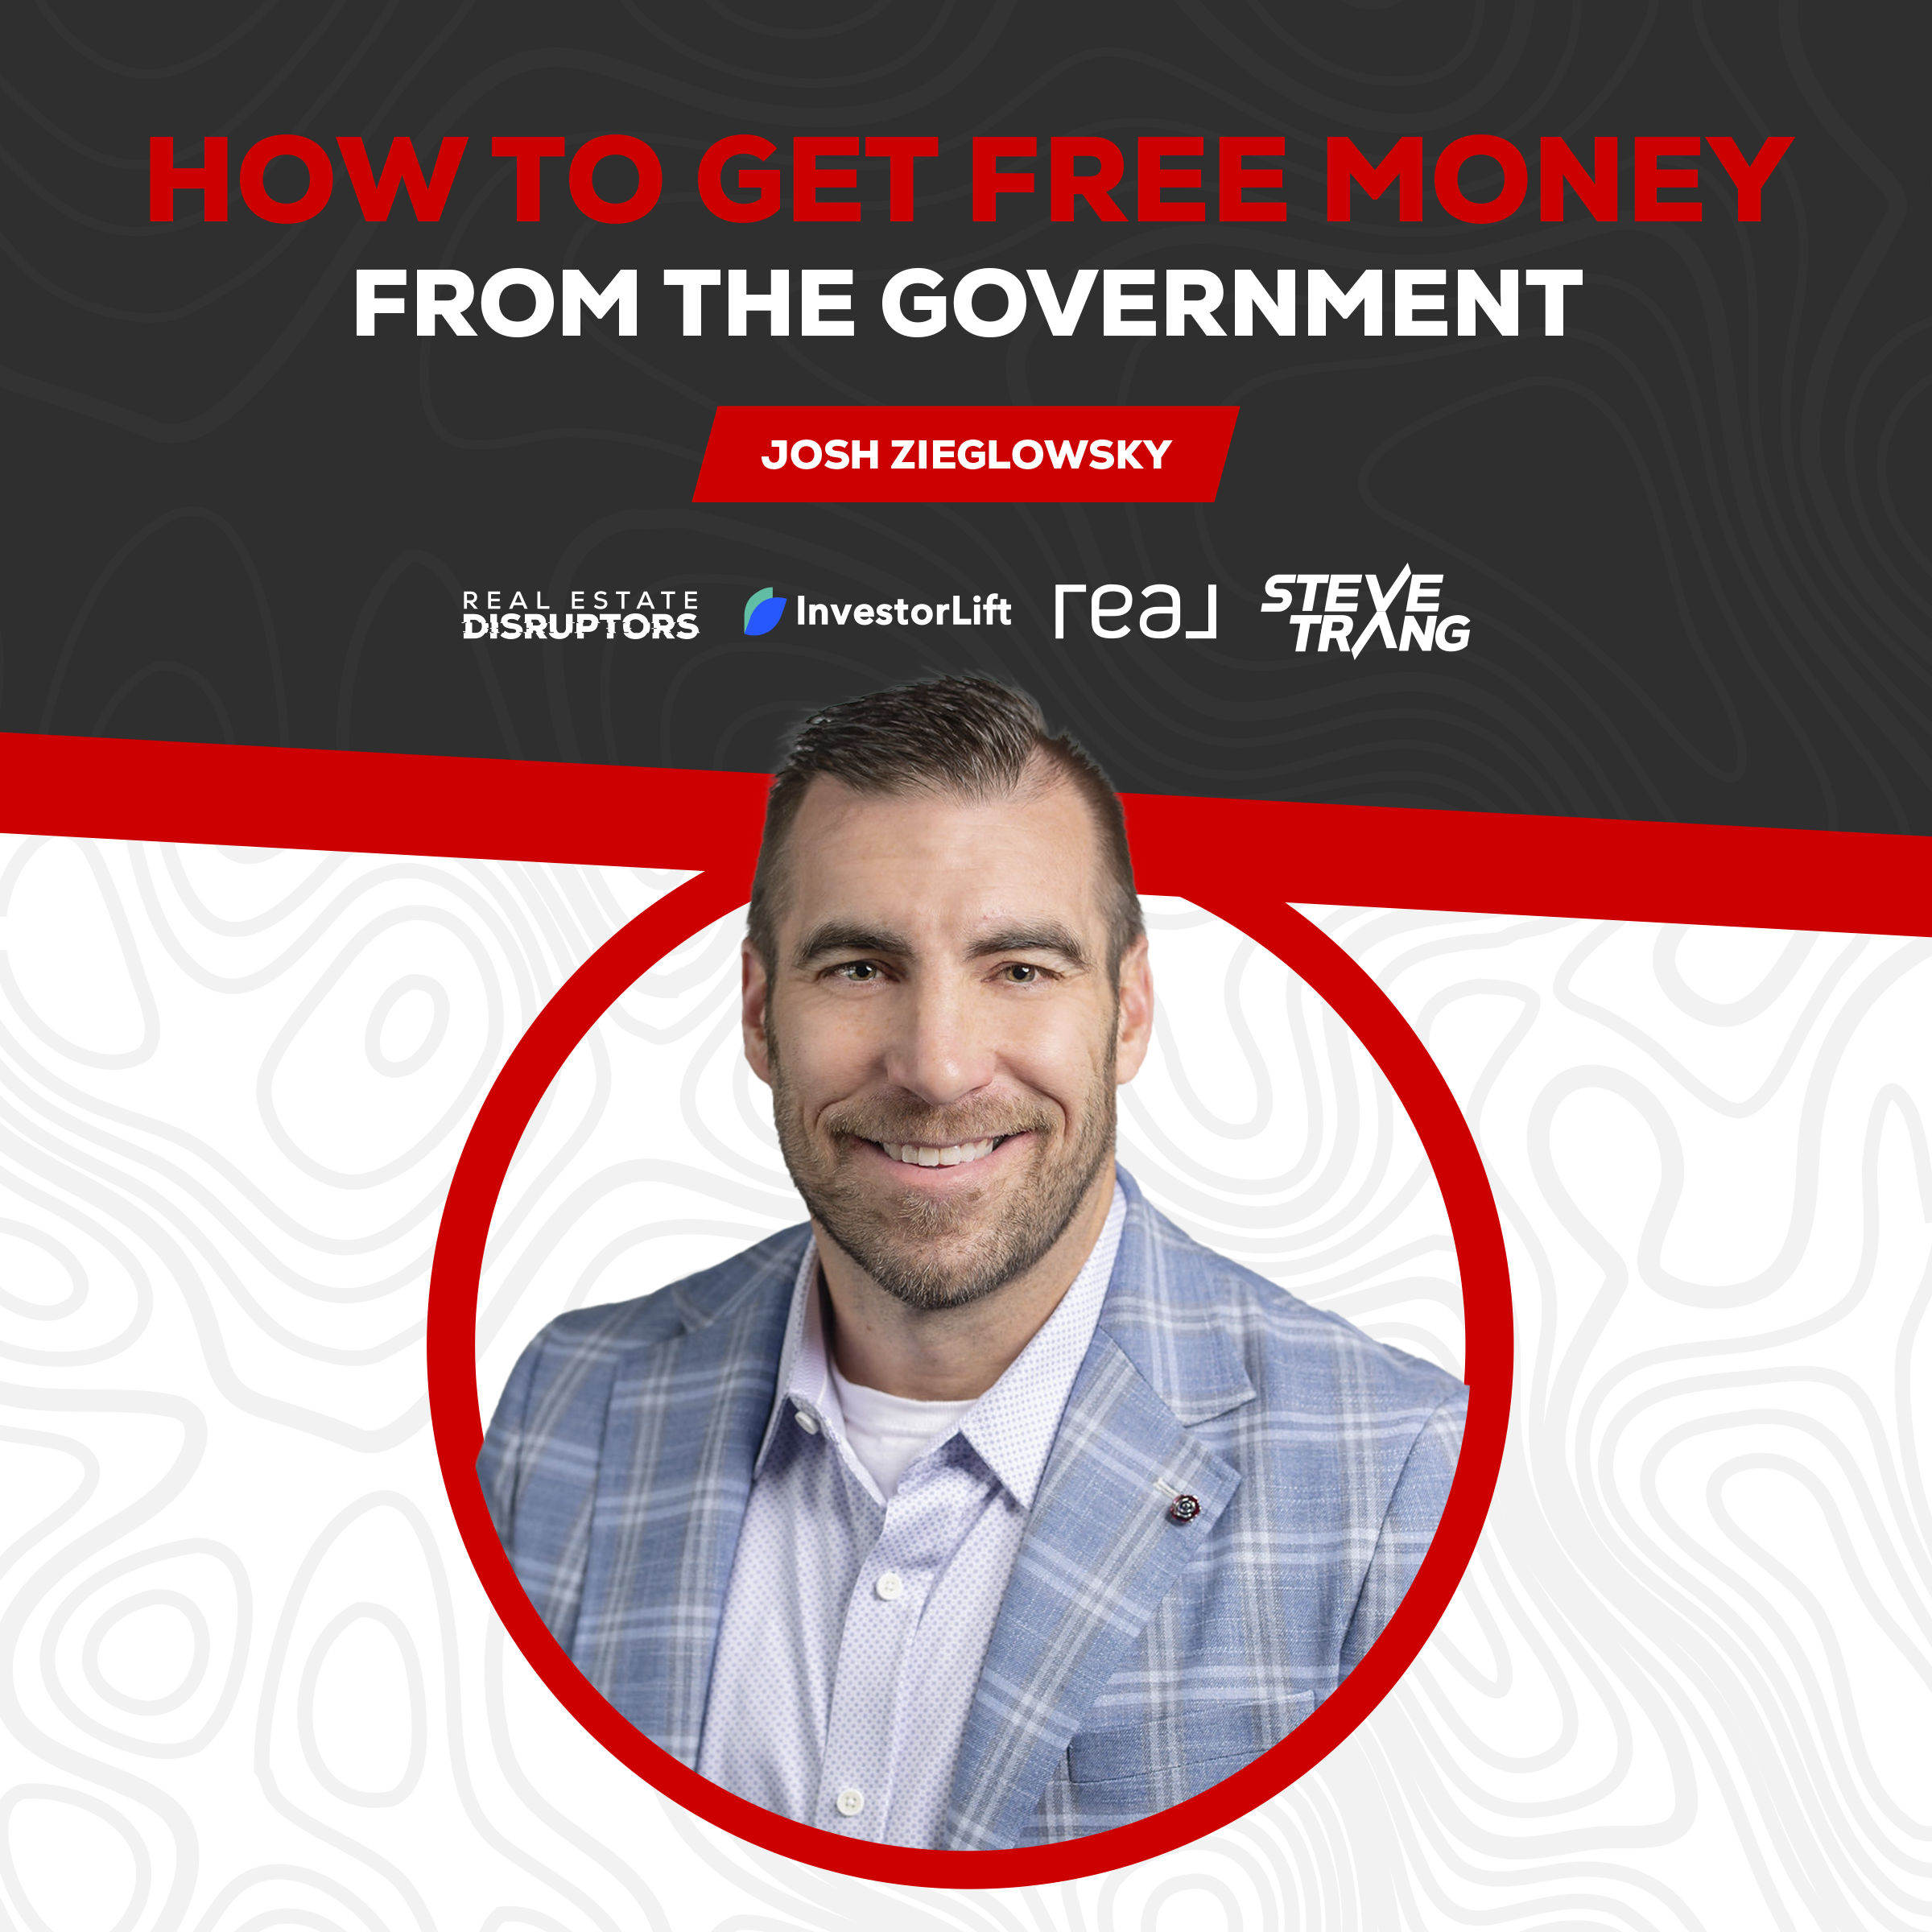 How to Get Free Money From the Government?